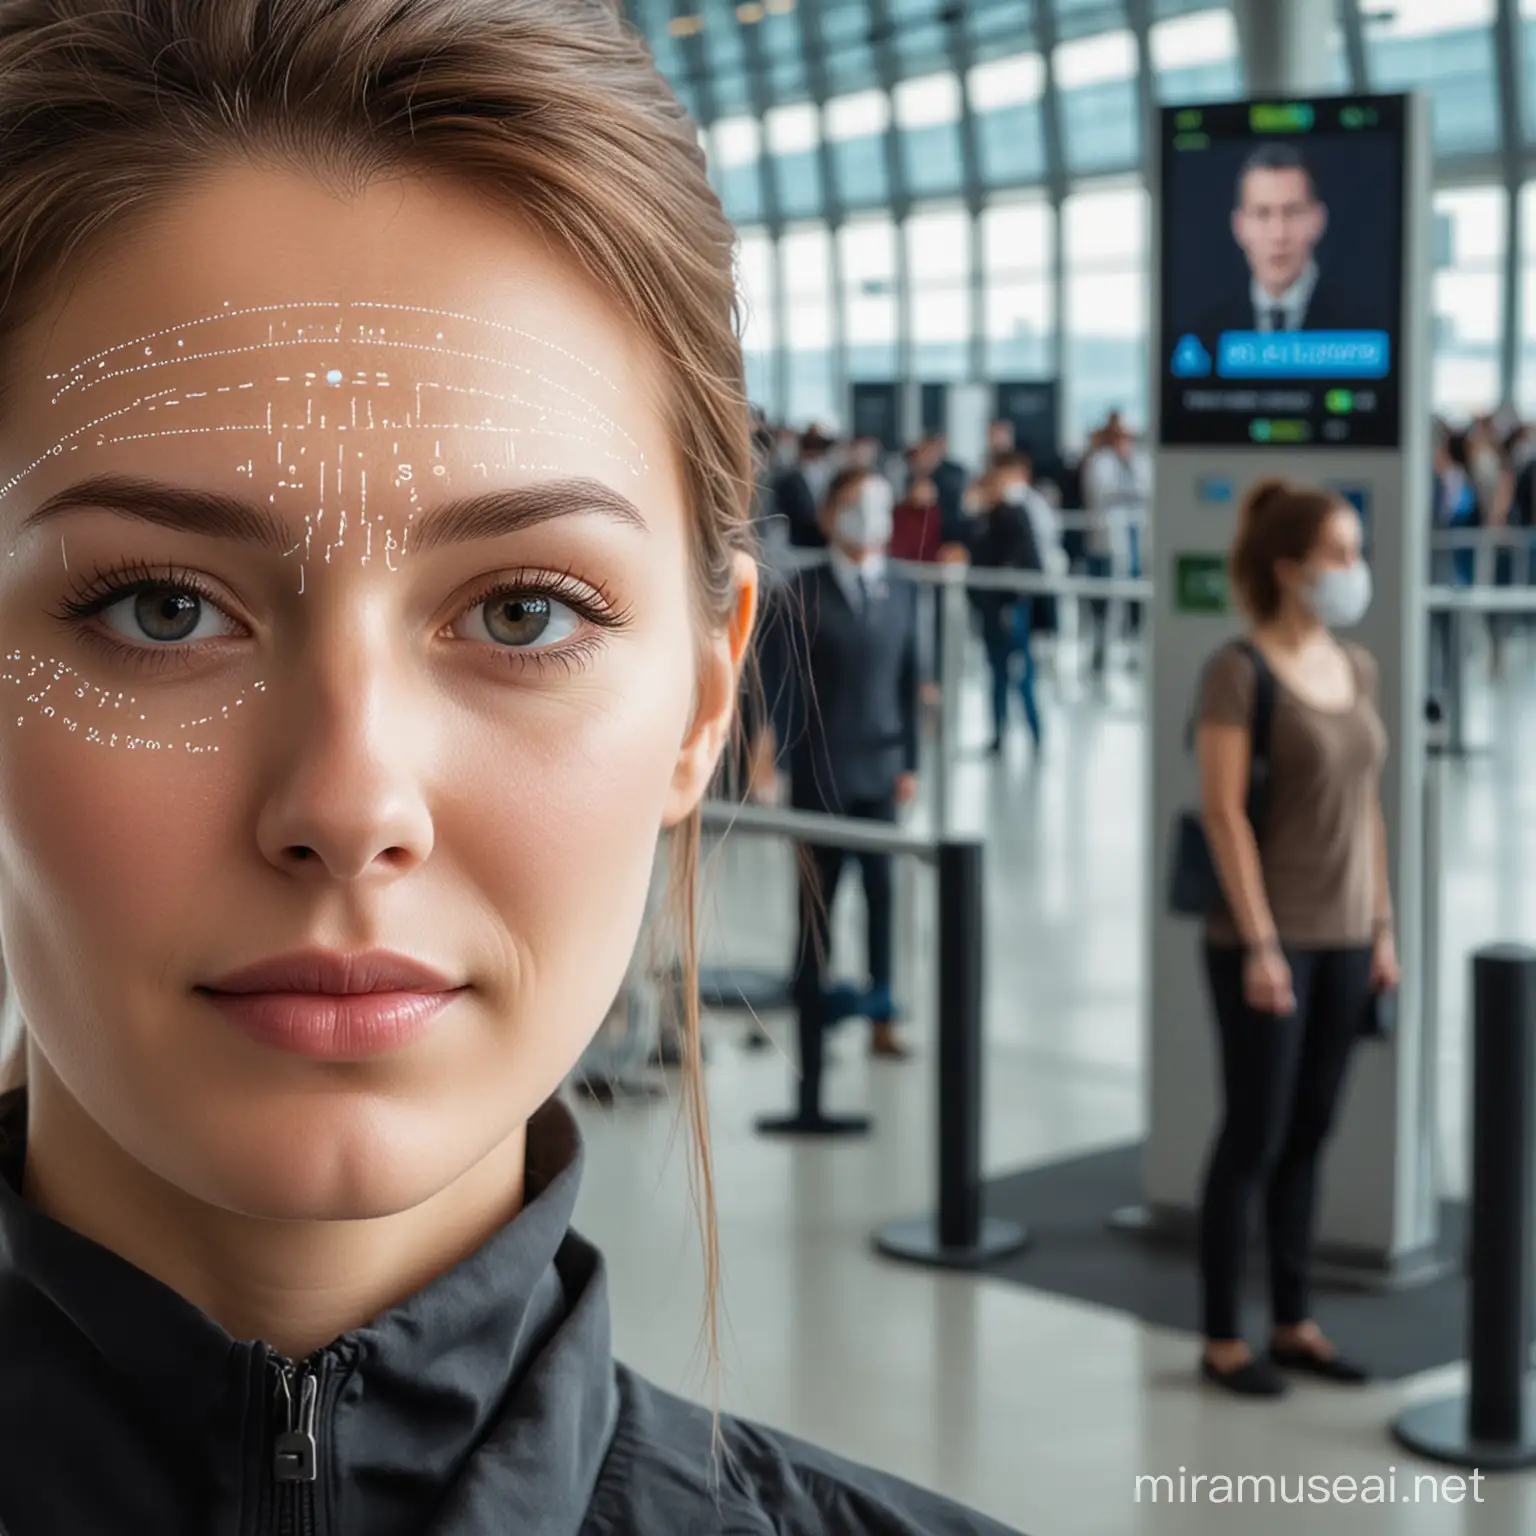 biometric face and airport